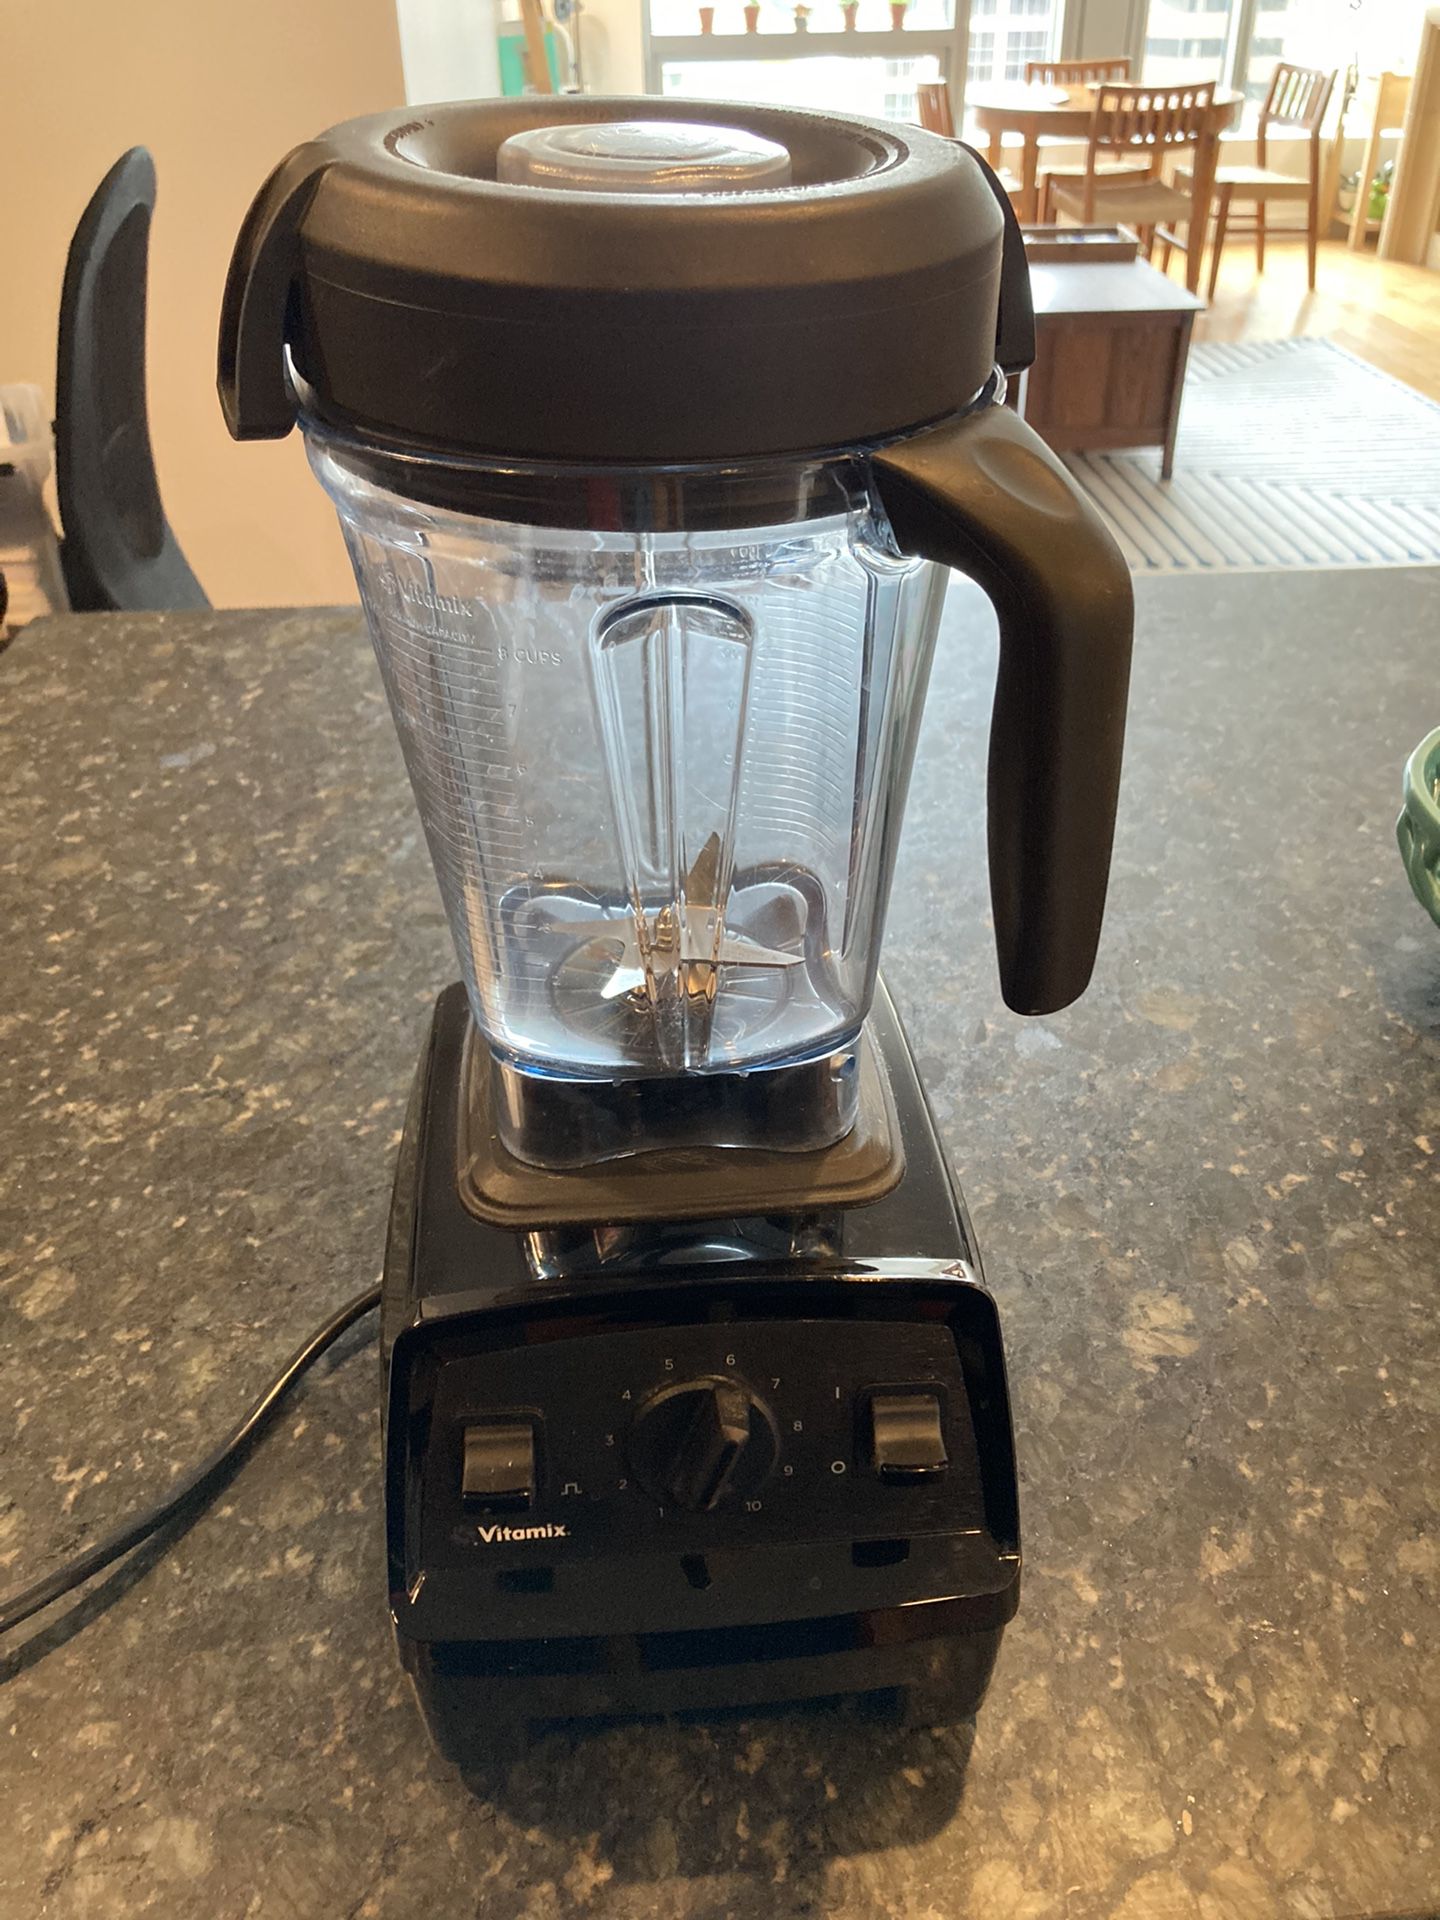 Barely Used - Vitamix E320 Blender for Sale in Bellevue, WA - OfferUp